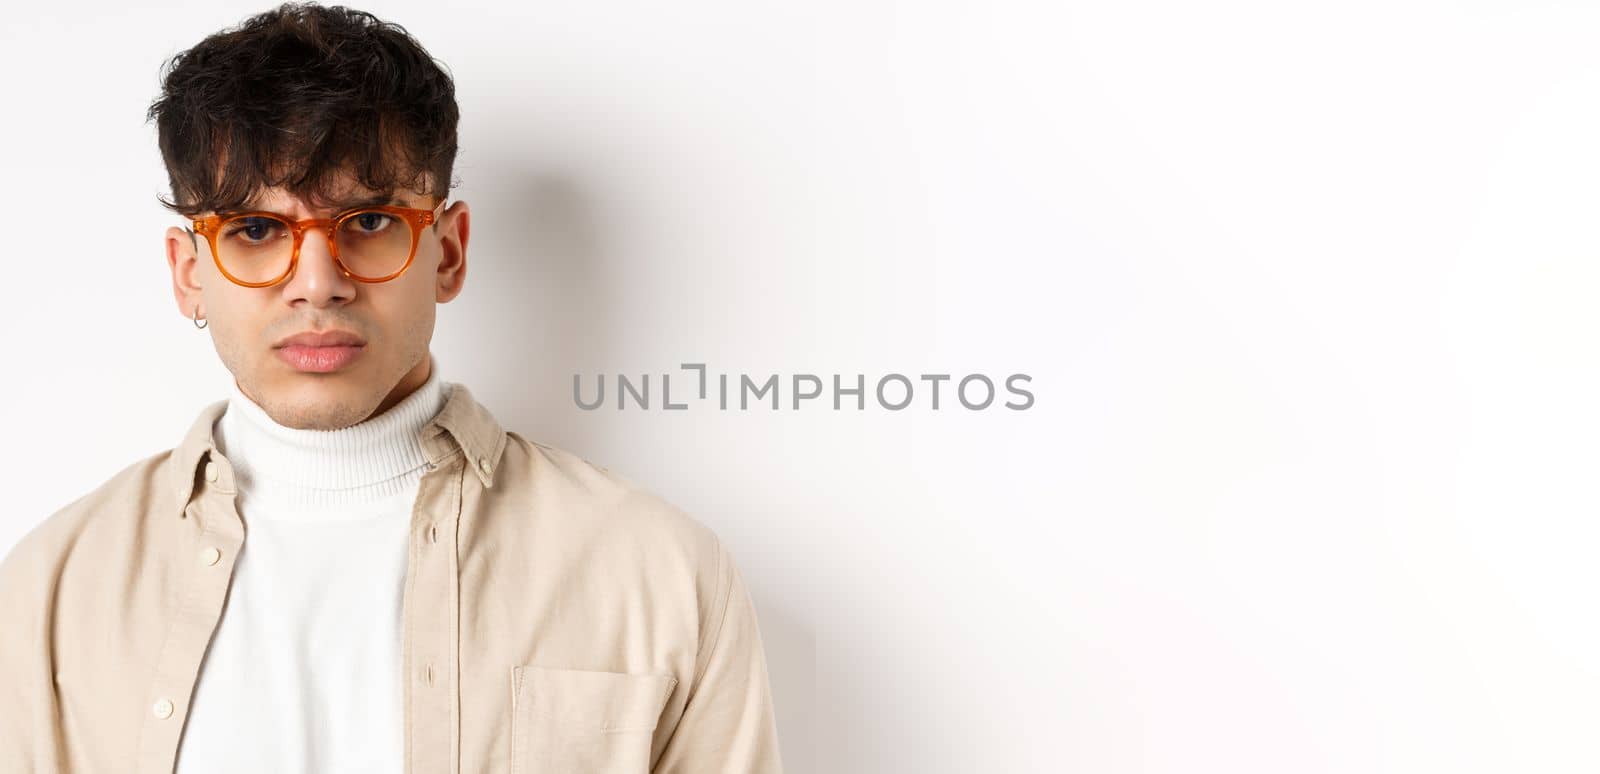 Close up portrait of angry frowning guy looking with dispise, standing mad on white background, wearing glasses.